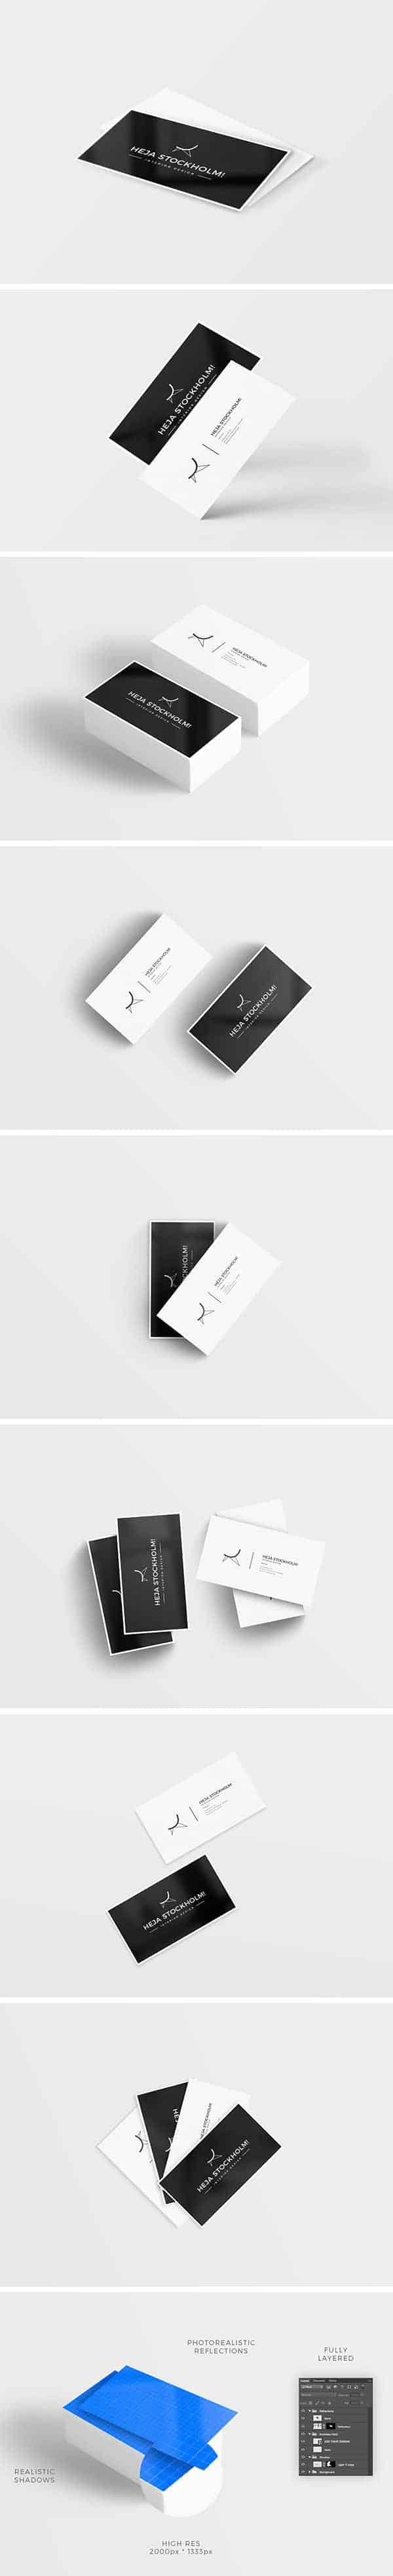 8 Clean Business Card MockUps